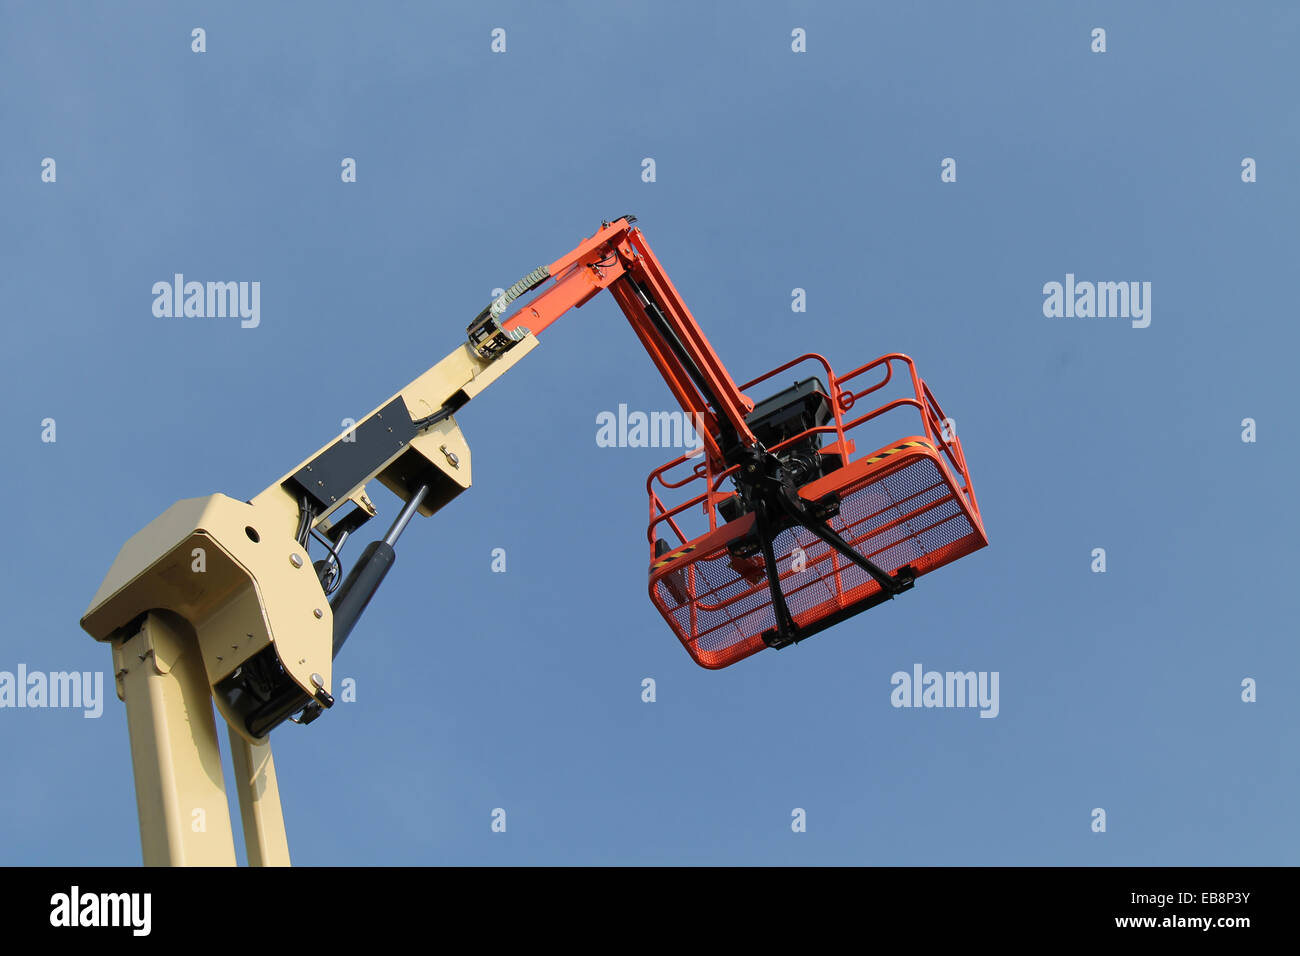 The Cage and Arm of a Mechanical Cherry Picker Lift. Stock Photo